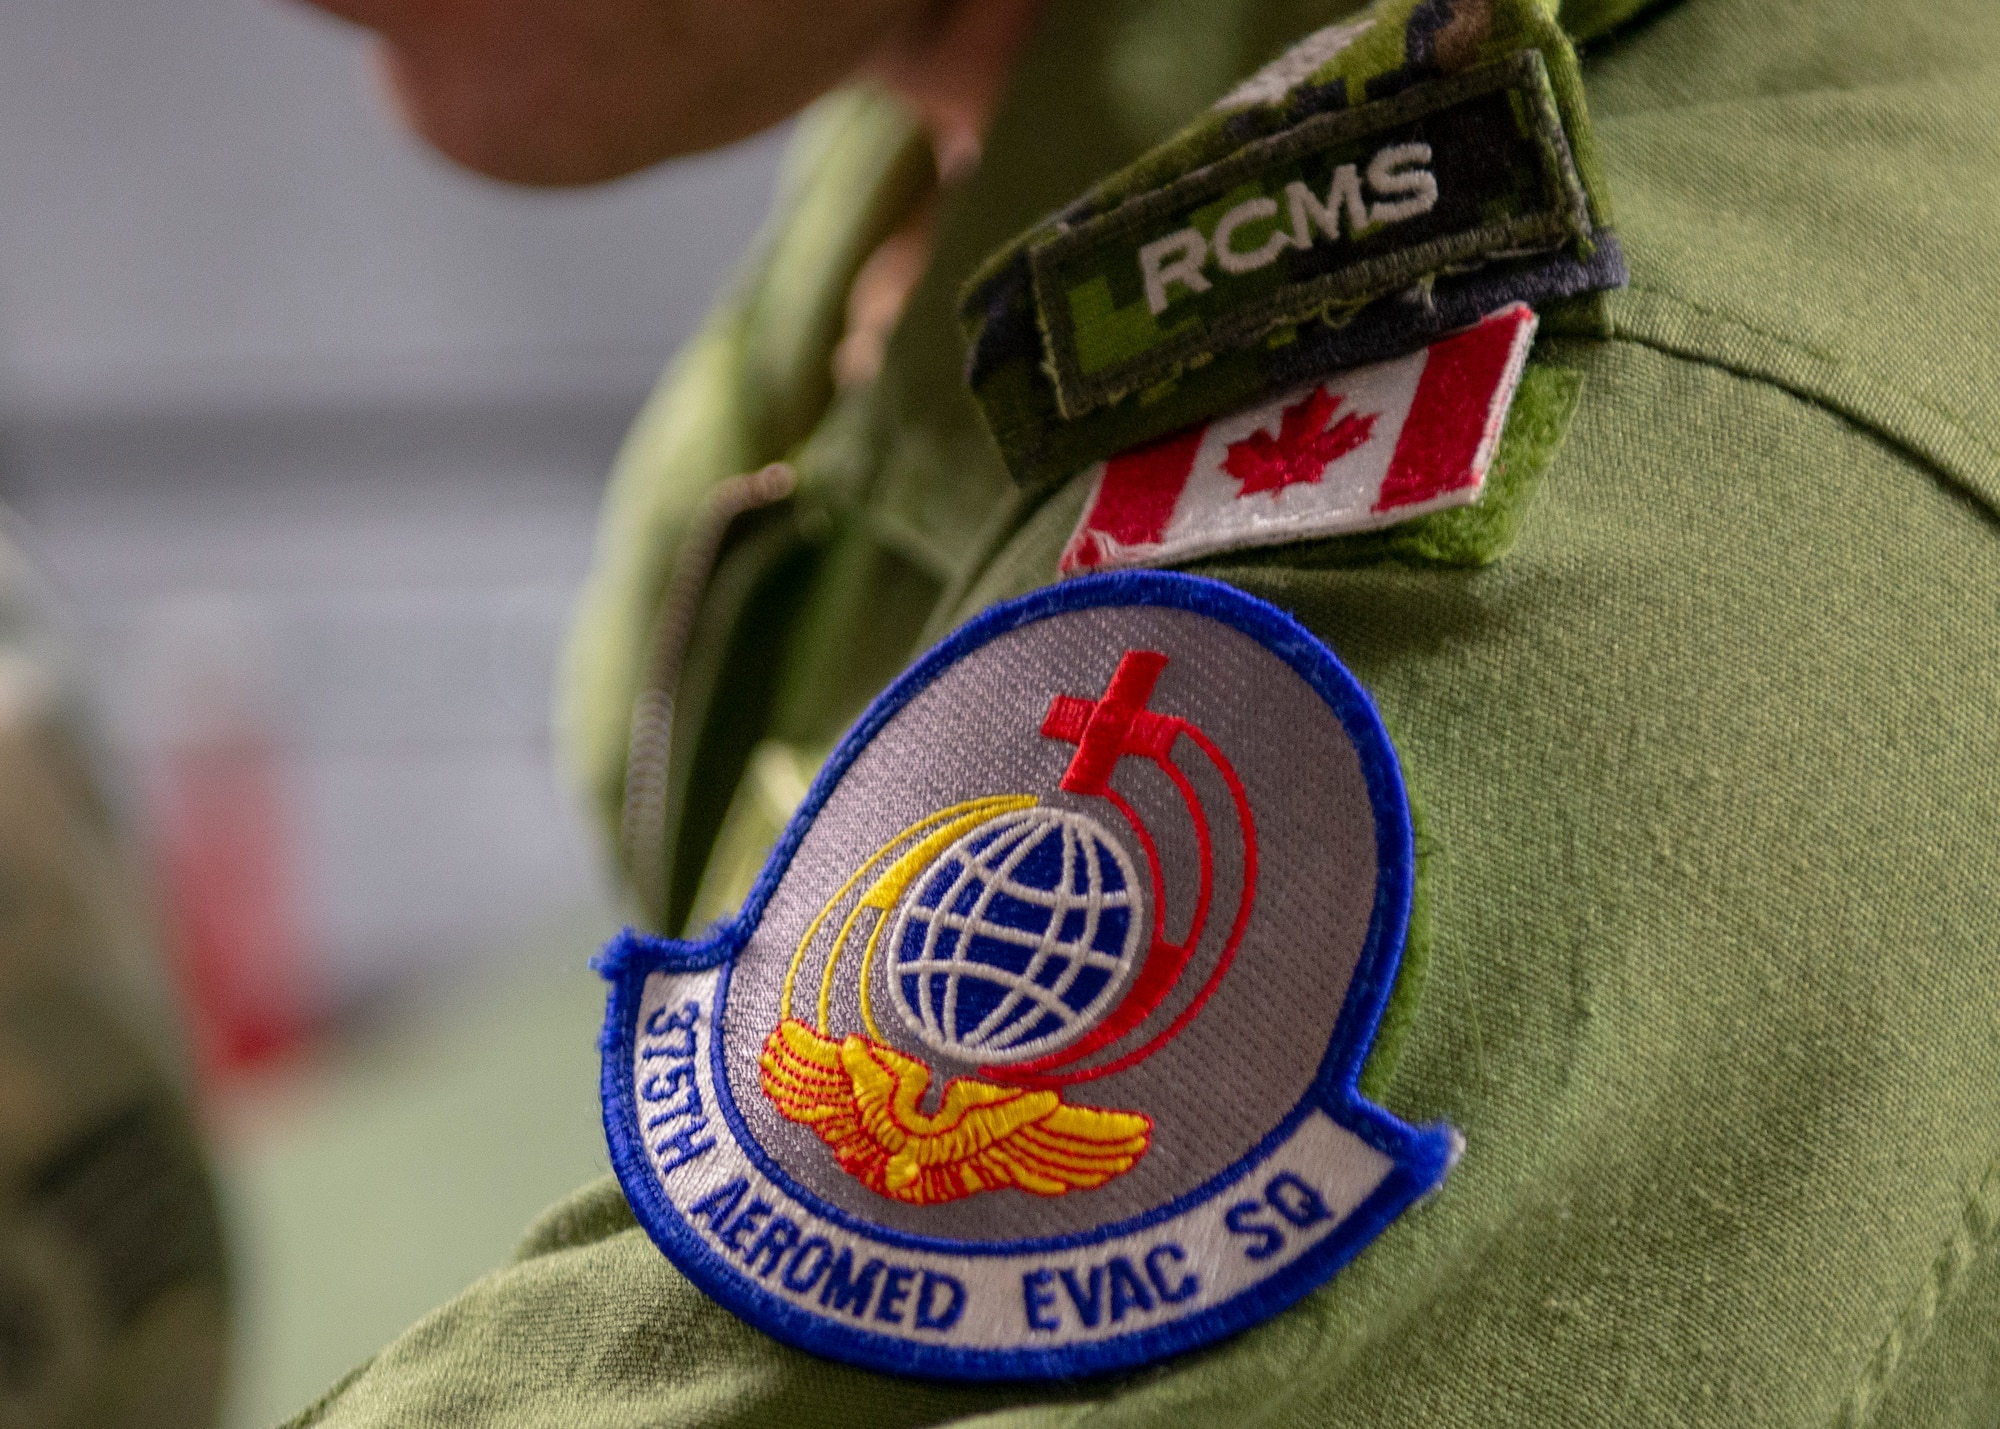 375th Armored Evactuation Squadron patch sits on uniform